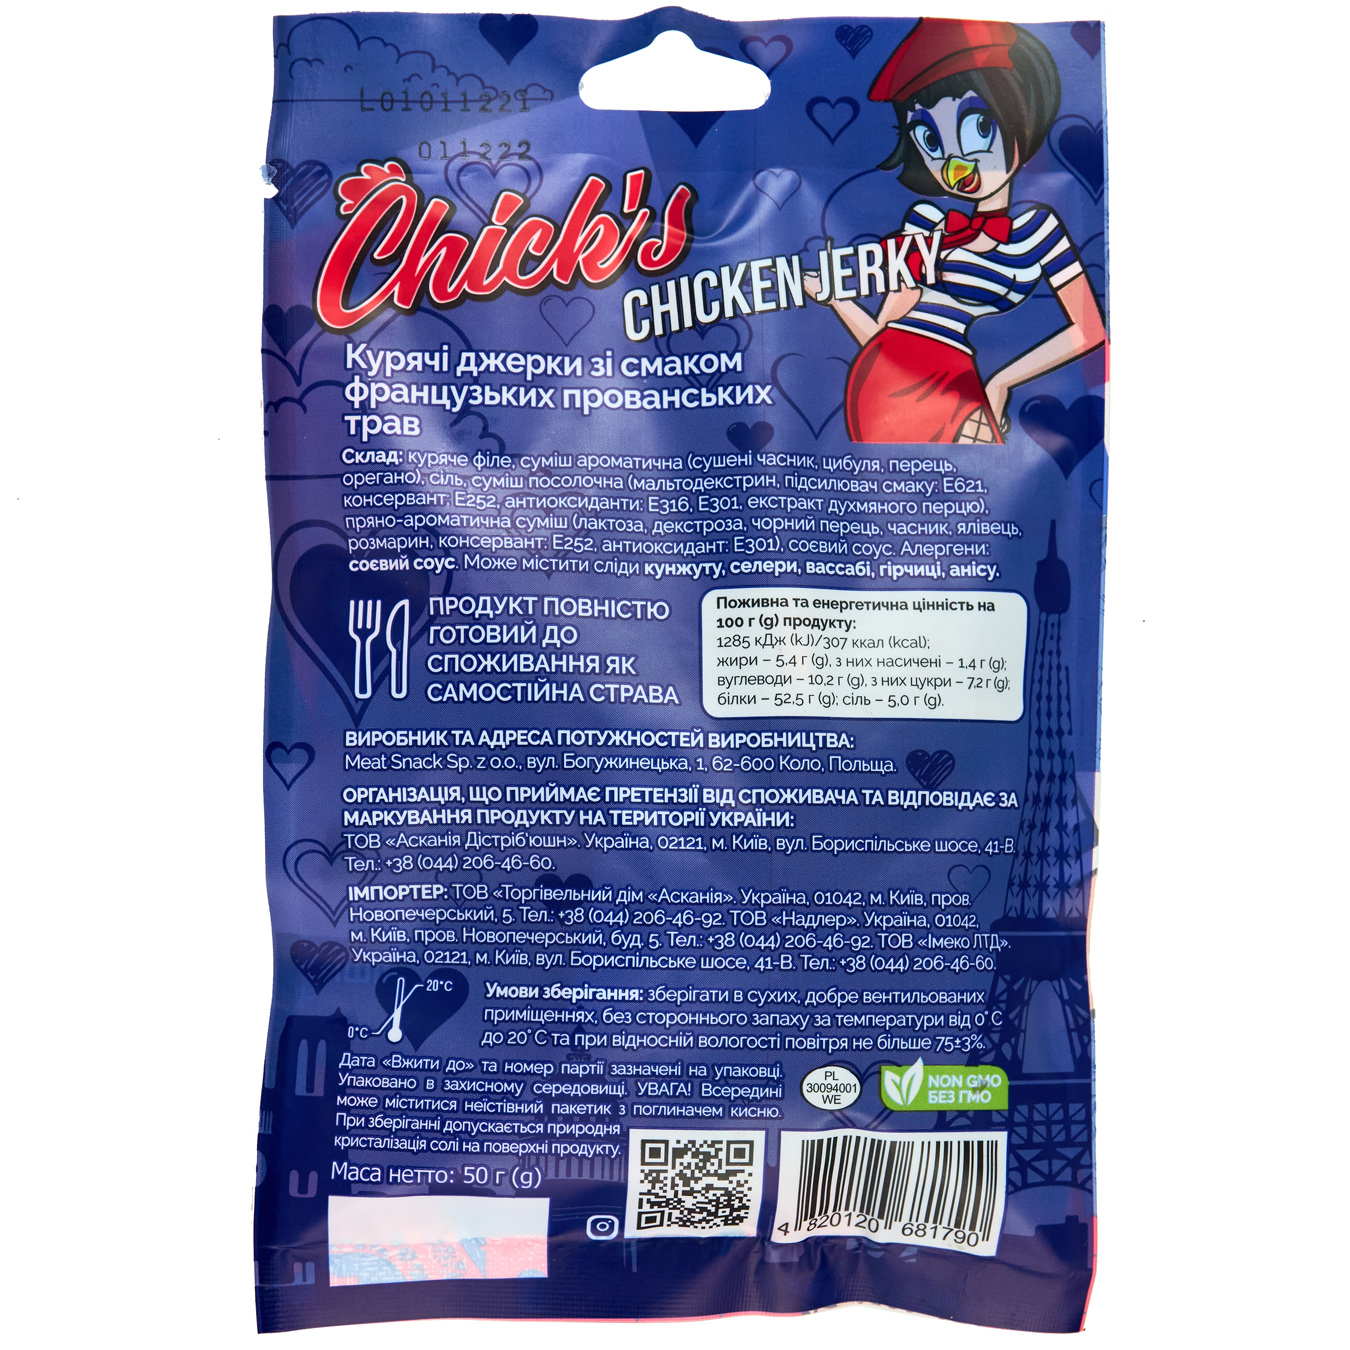 Chick's jerky chicken taste of French Provencal herbs 50g 2